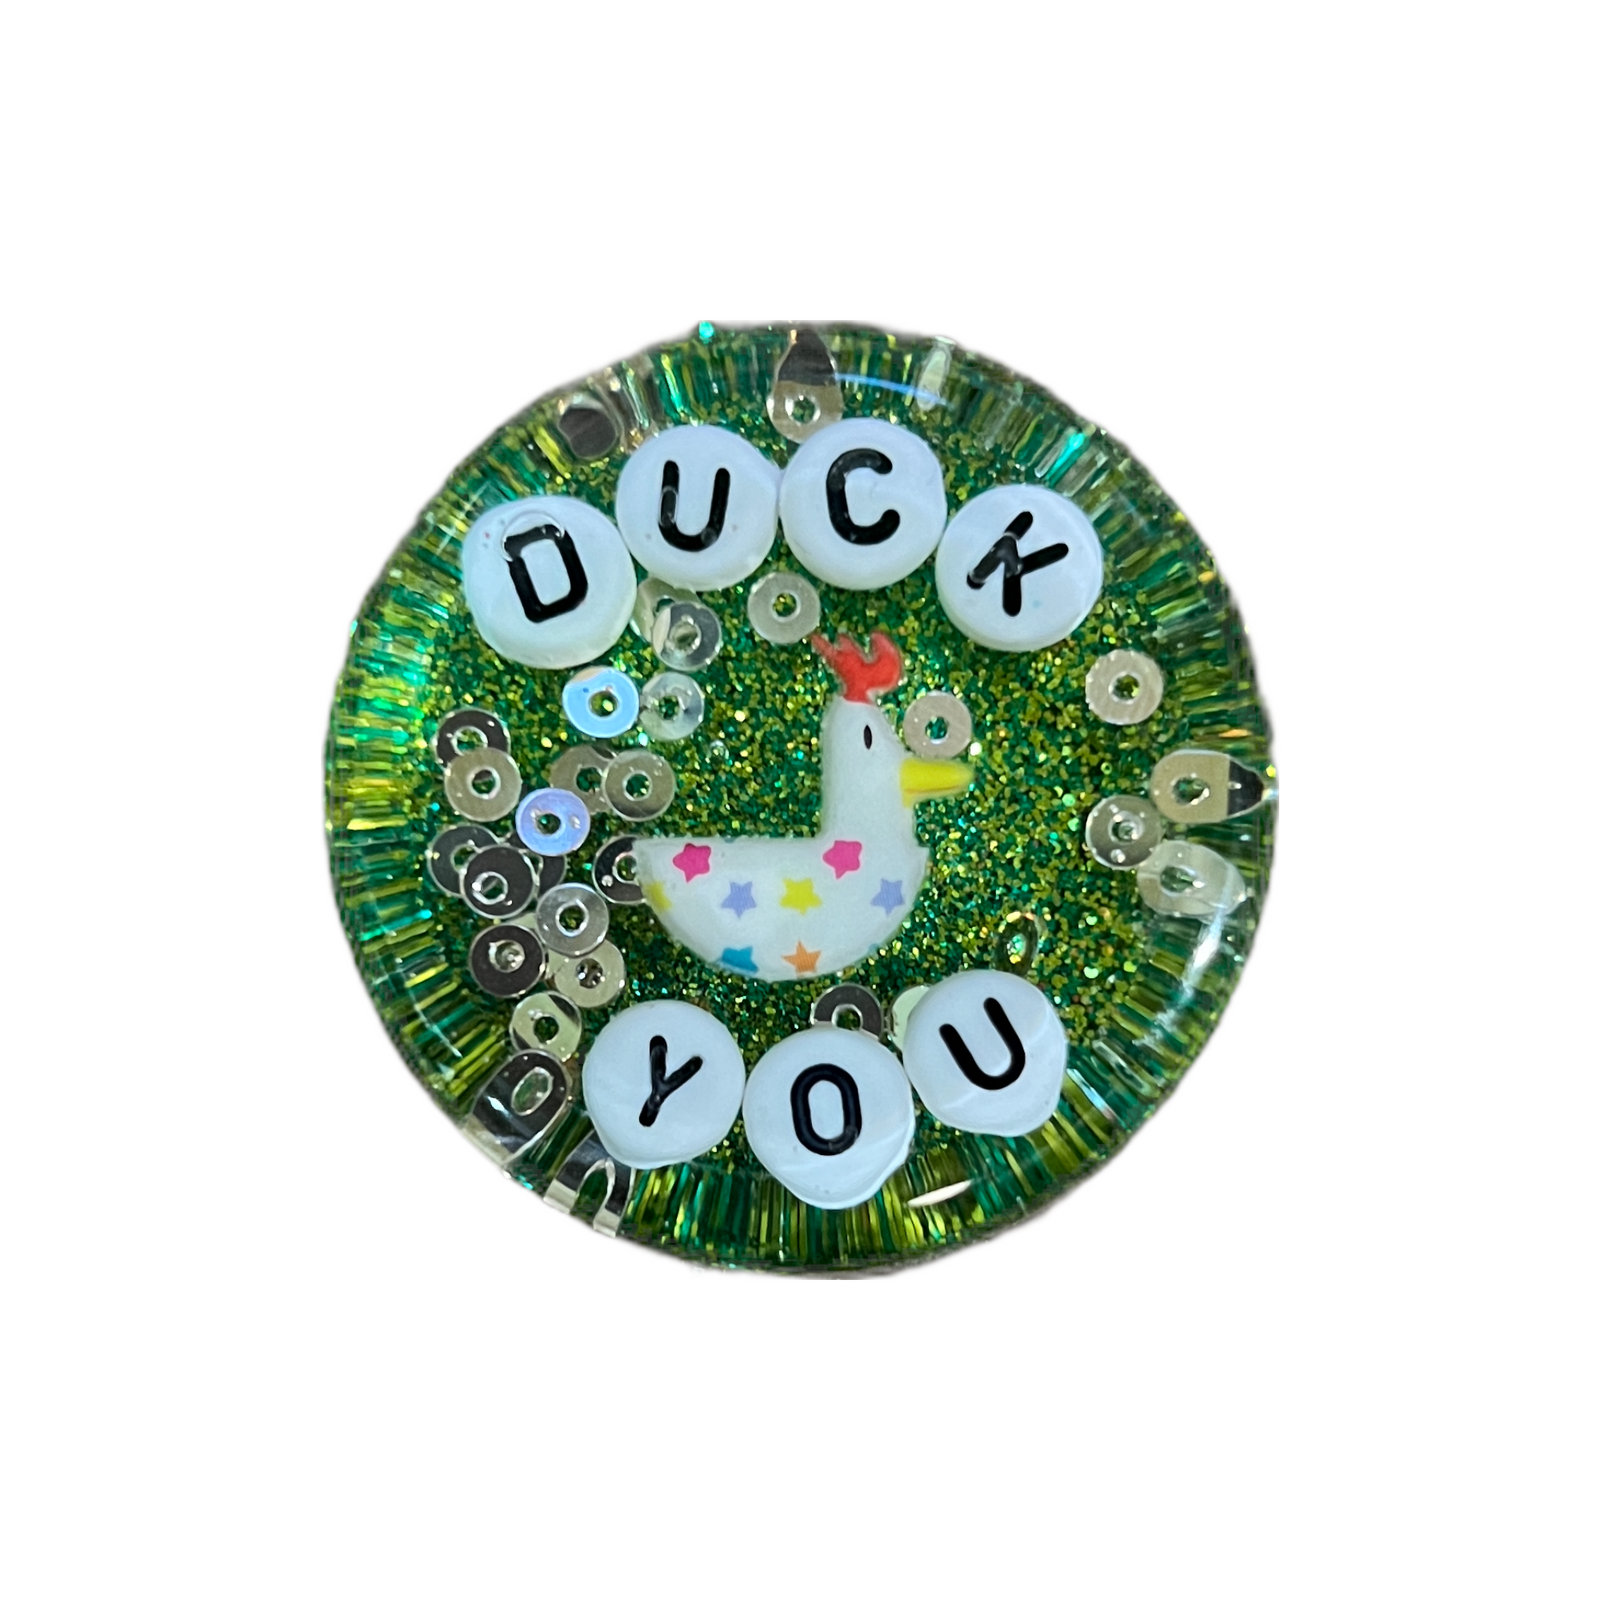 Duck You - Shower Art - READY TO SHIP